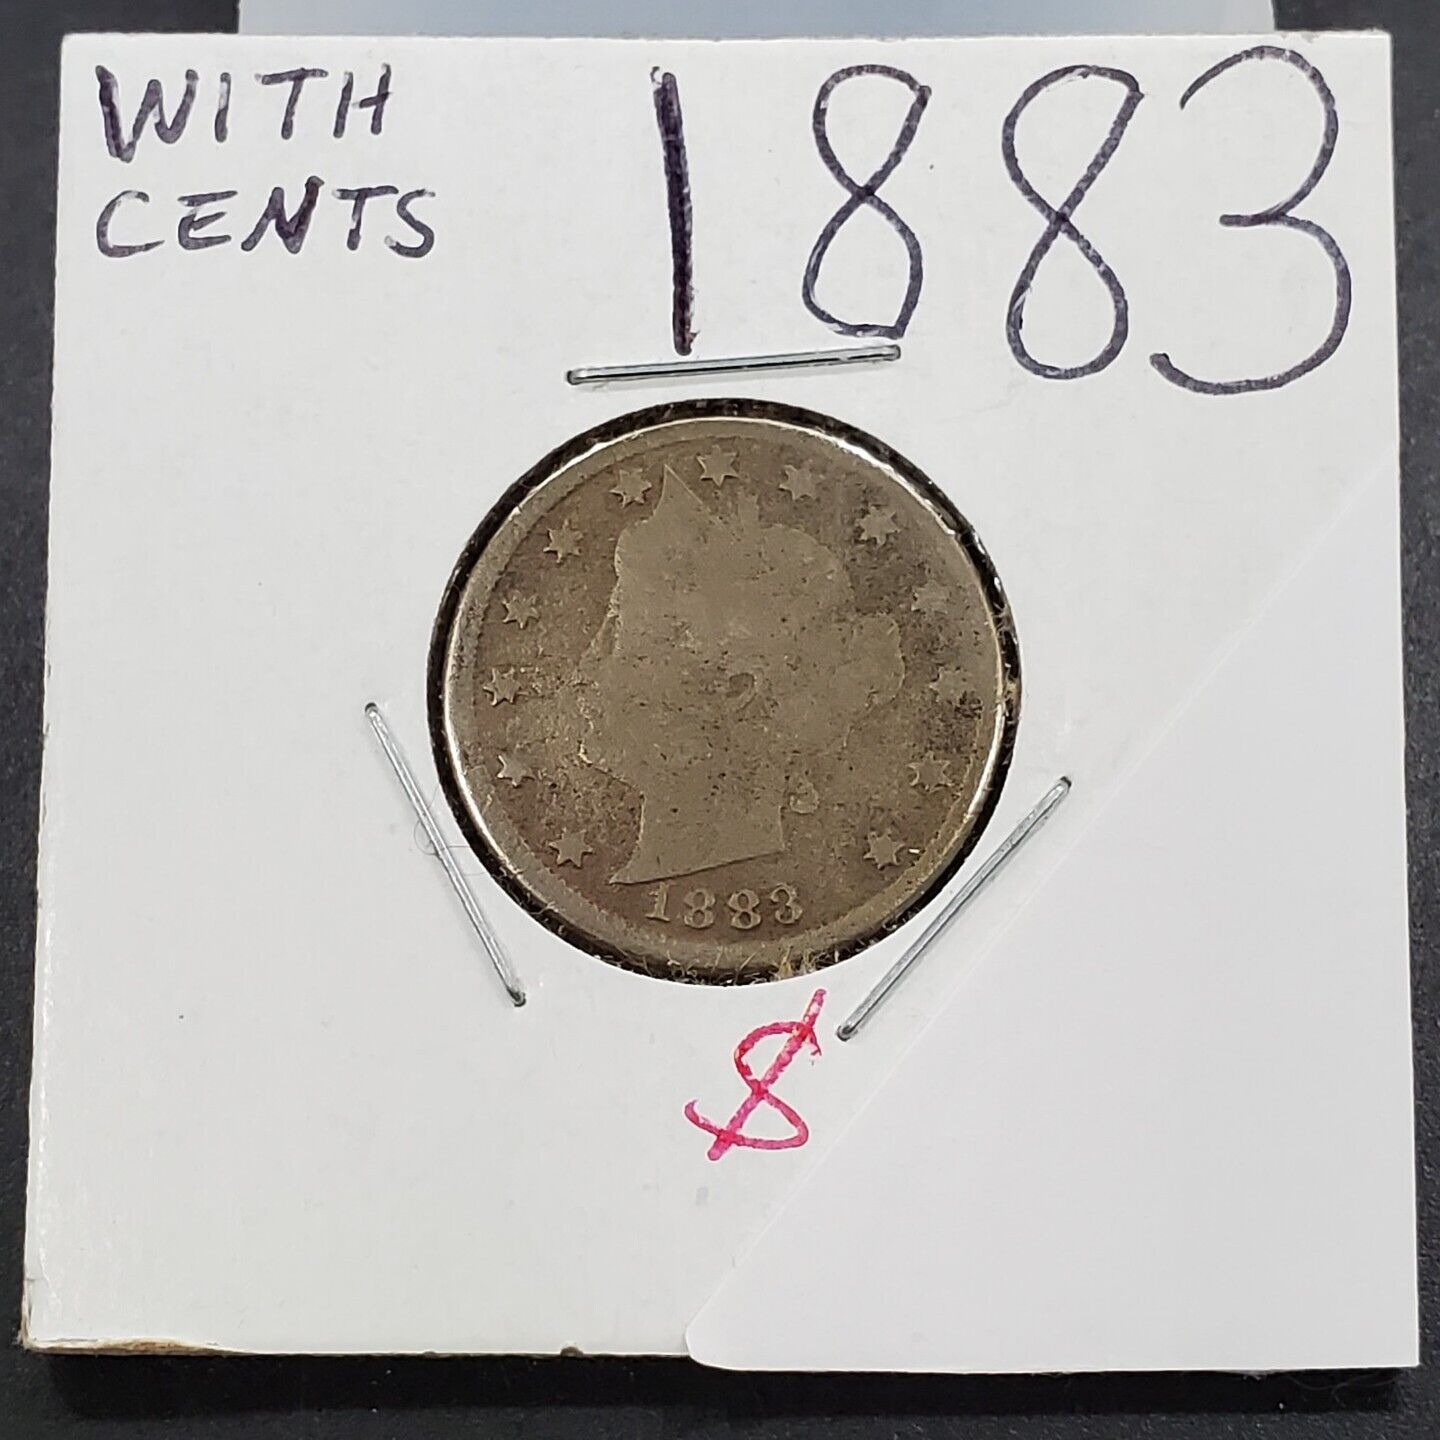 1883 With Cents Variety Liberty V Nickel Variety Coin Circulated Good details